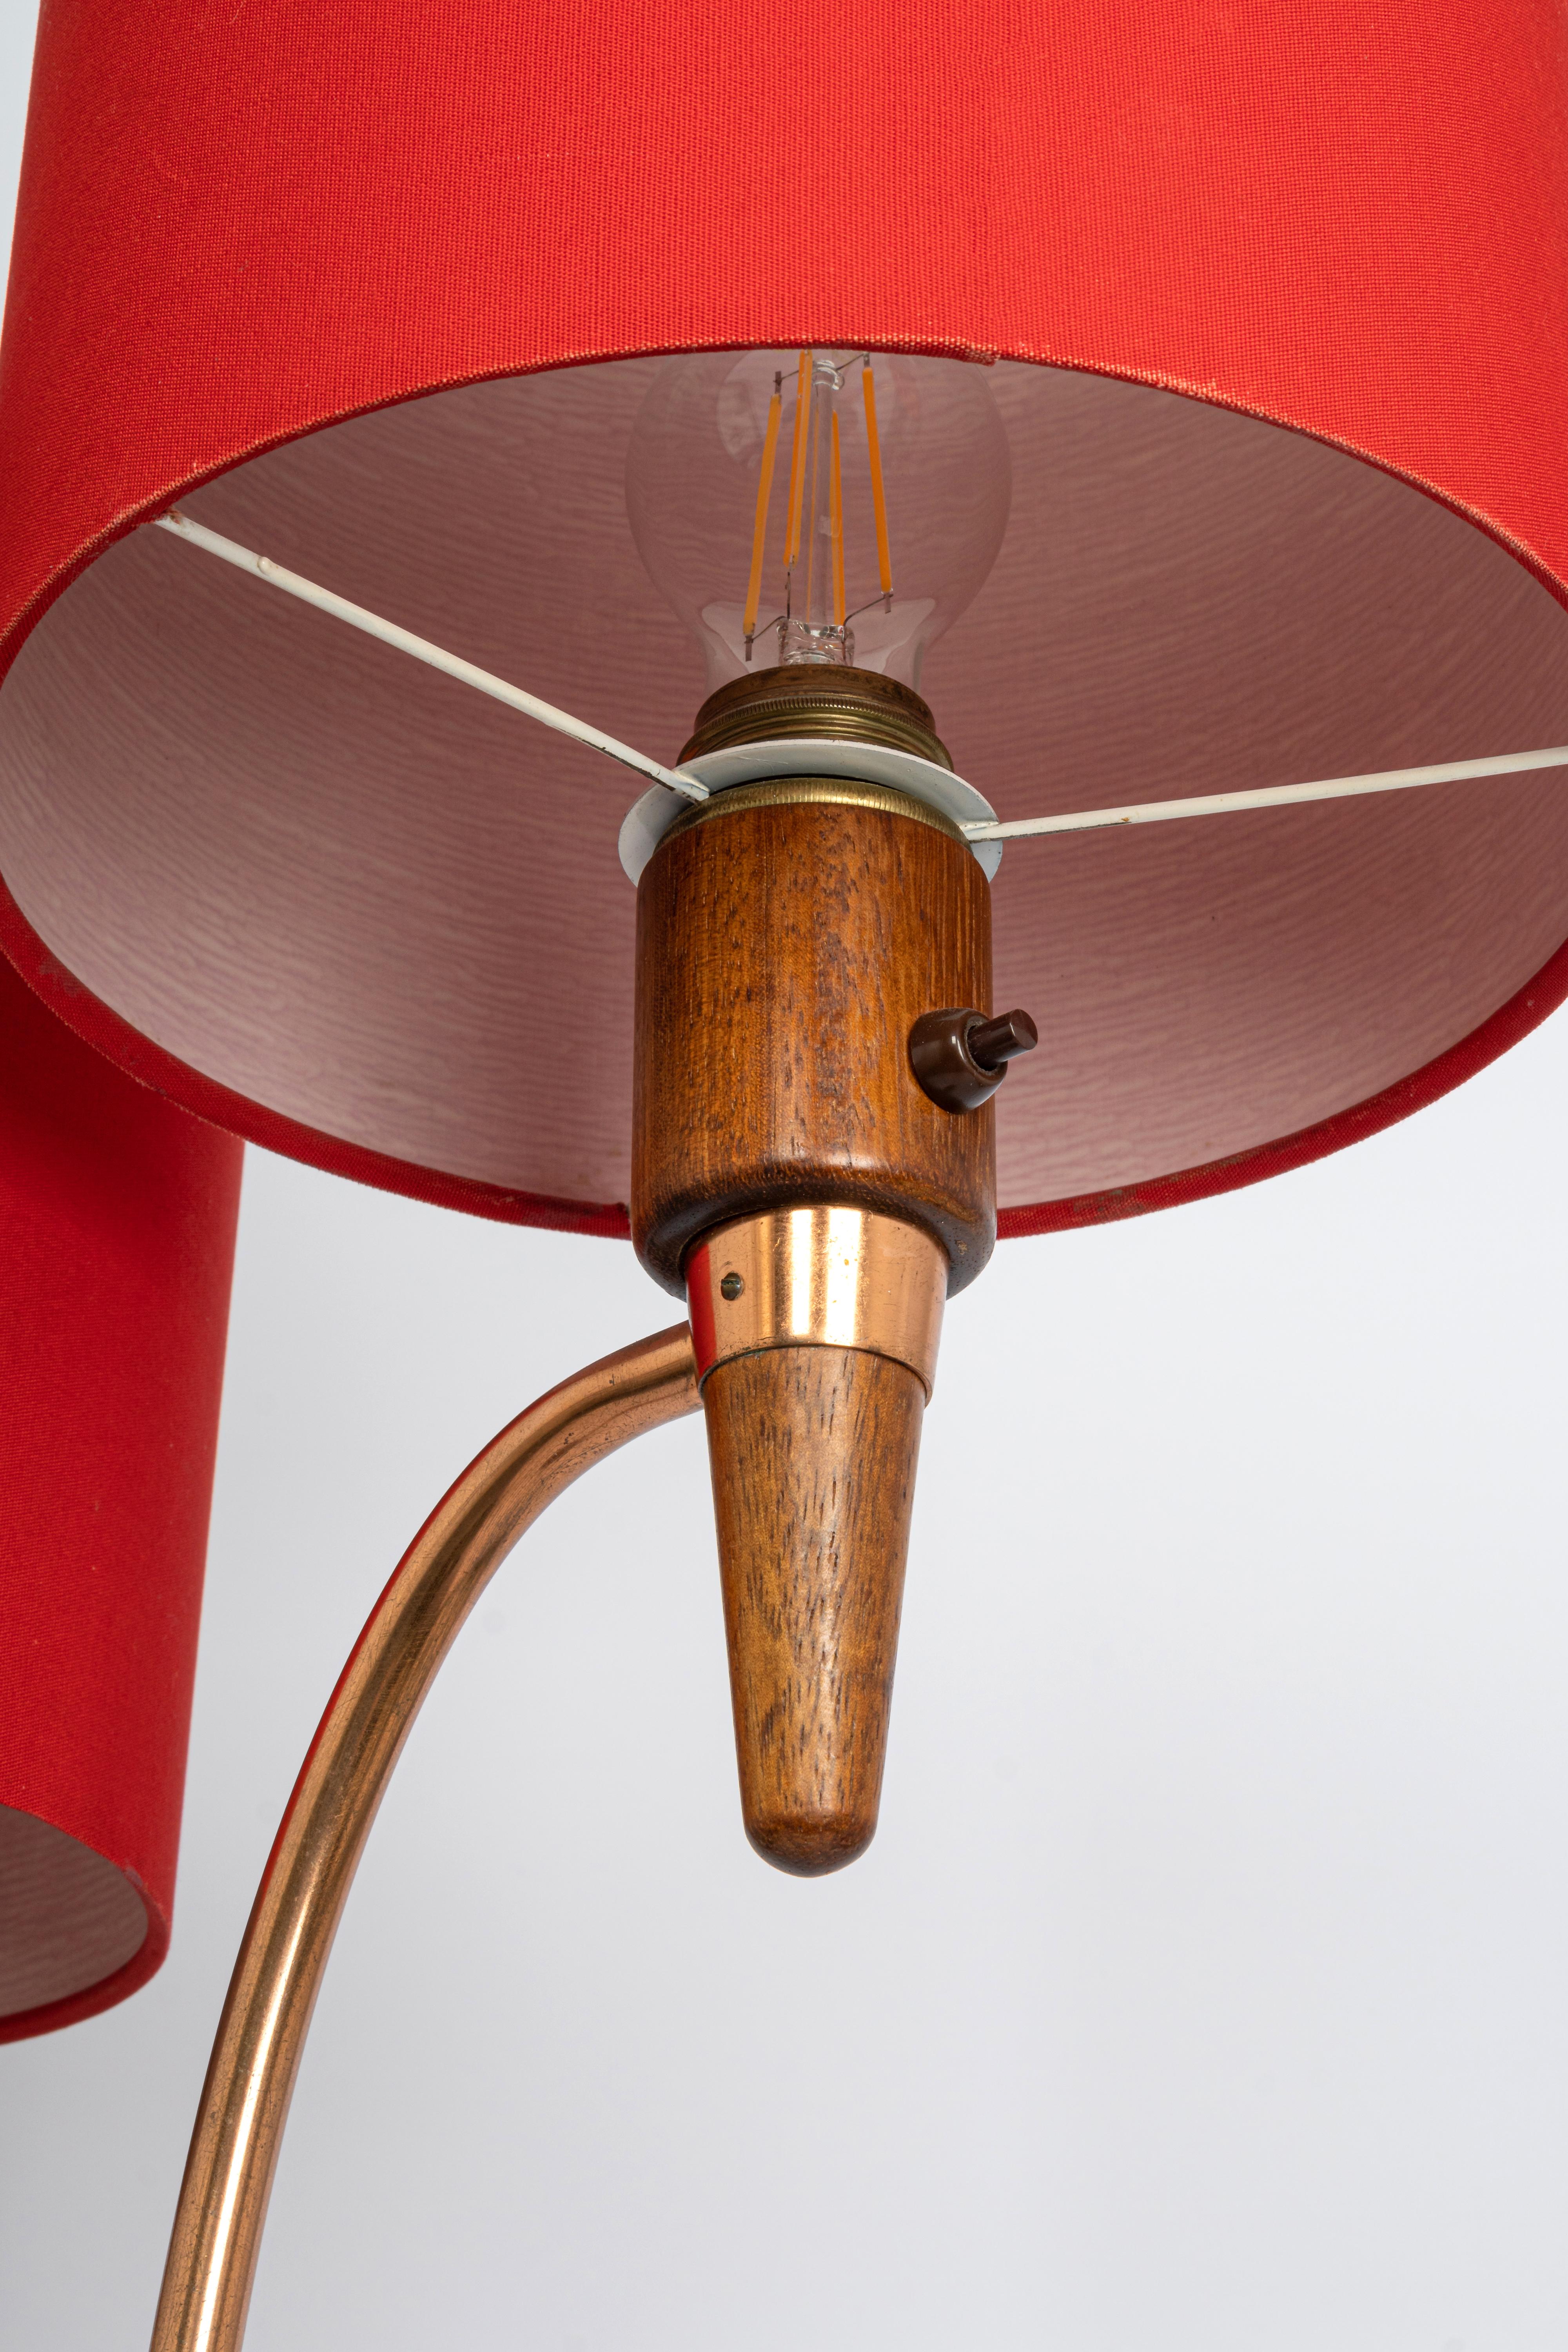 Wonderful Minimalistic Temde teak and copper floor lamp, 1960s. A unique, timeless, and elegant made by Temde, Switzerland. 

Good condition. Cleaned, well-wired and ready to use. 

The fixture requires 2 x E27 Standard bulbs with 80W max